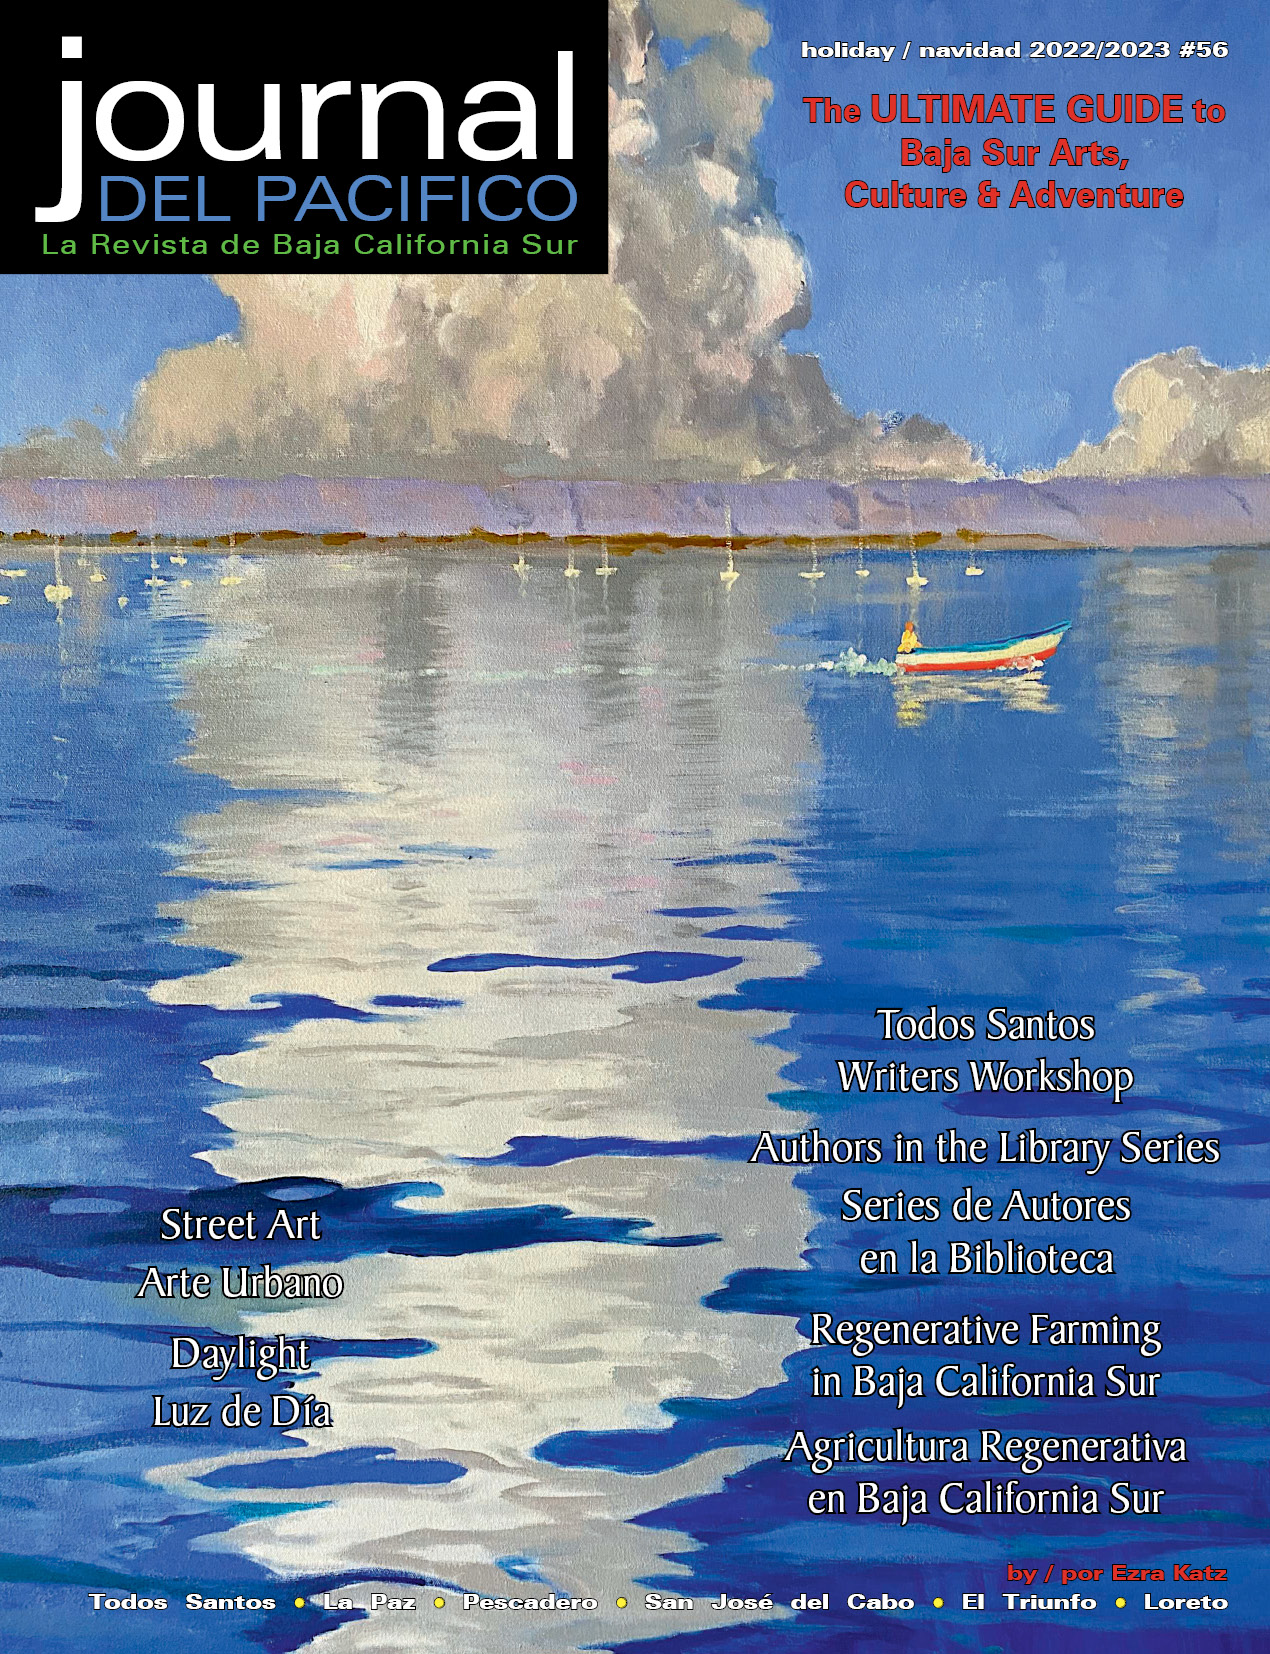 Holiday/Navidad 2022/2023 Issue of Journal del Pacifico